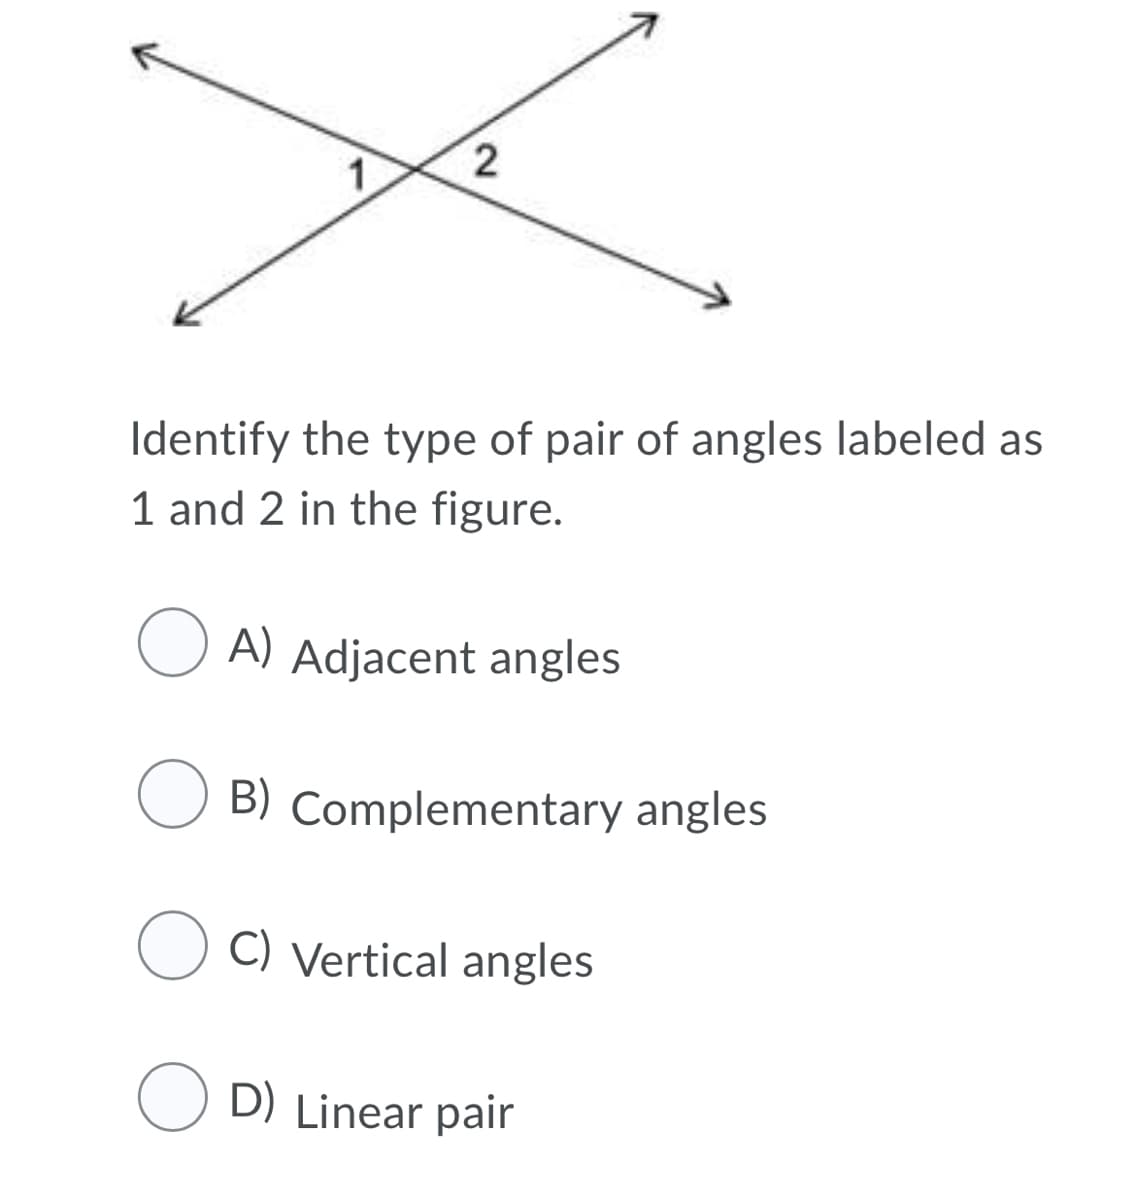 Identify the type of pair of angles labeled as
1 and 2 in the figure.
O A) Adjacent angles
O B) Complementary angles
C) Vertical angles
O D) Linear pair
2.
